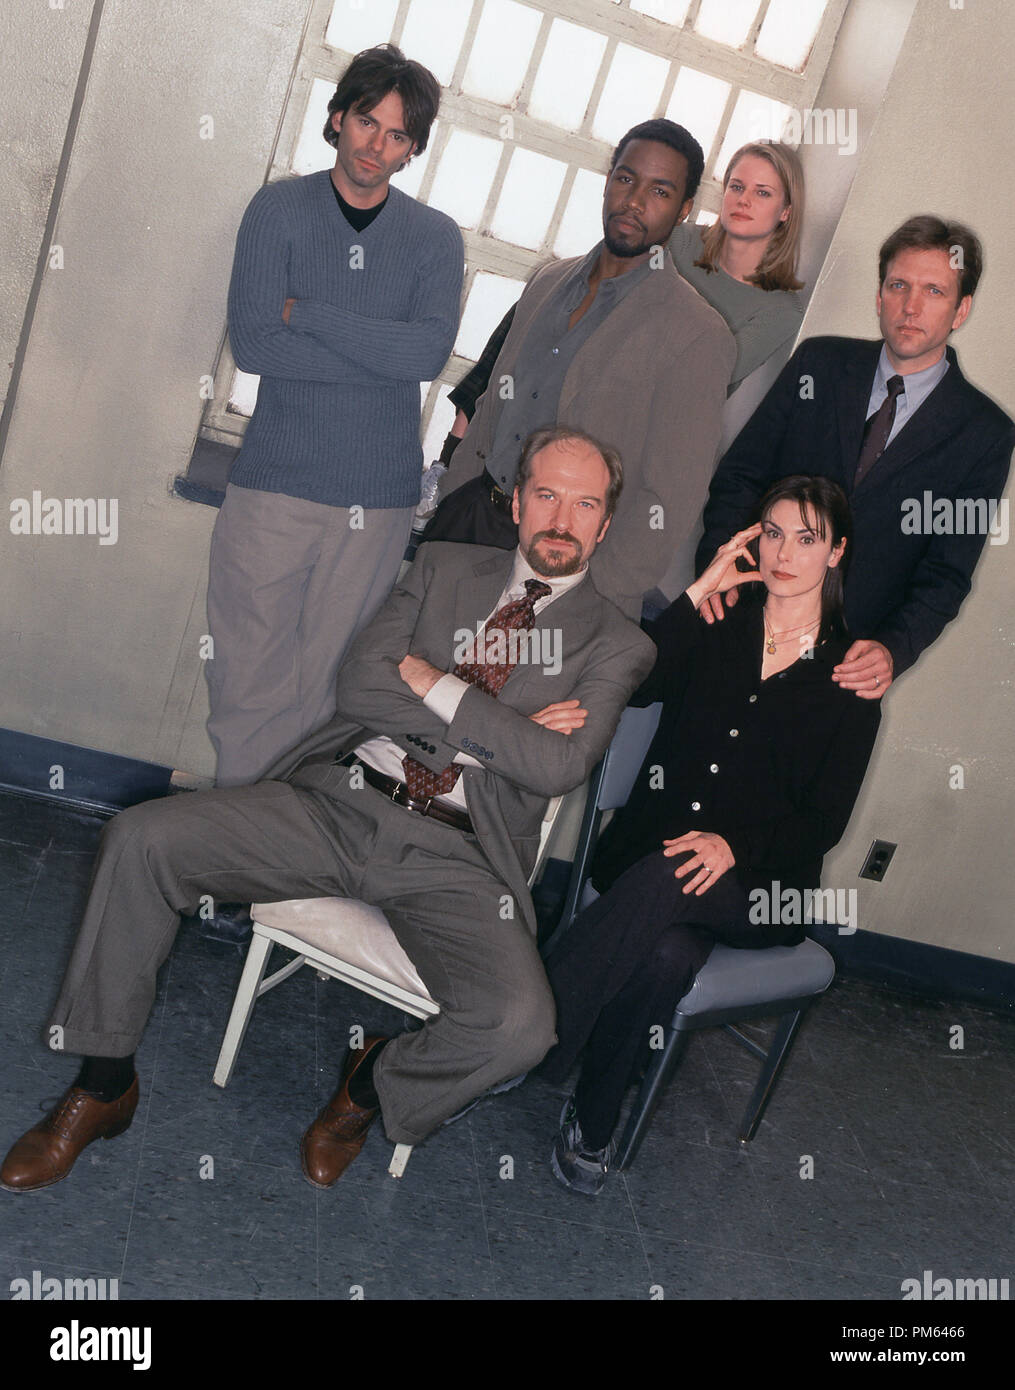 Film Still / Publicity Stills from 'Wonderland' Billy Burke, Ted Levine, Michael Jai White, Joelle Carter, Michelle Forbes, Martin Donovan 2000 Photo Credit: Bob D'Amico  File Reference # 30846010THA  For Editorial Use Only -  All Rights Reserved Stock Photo